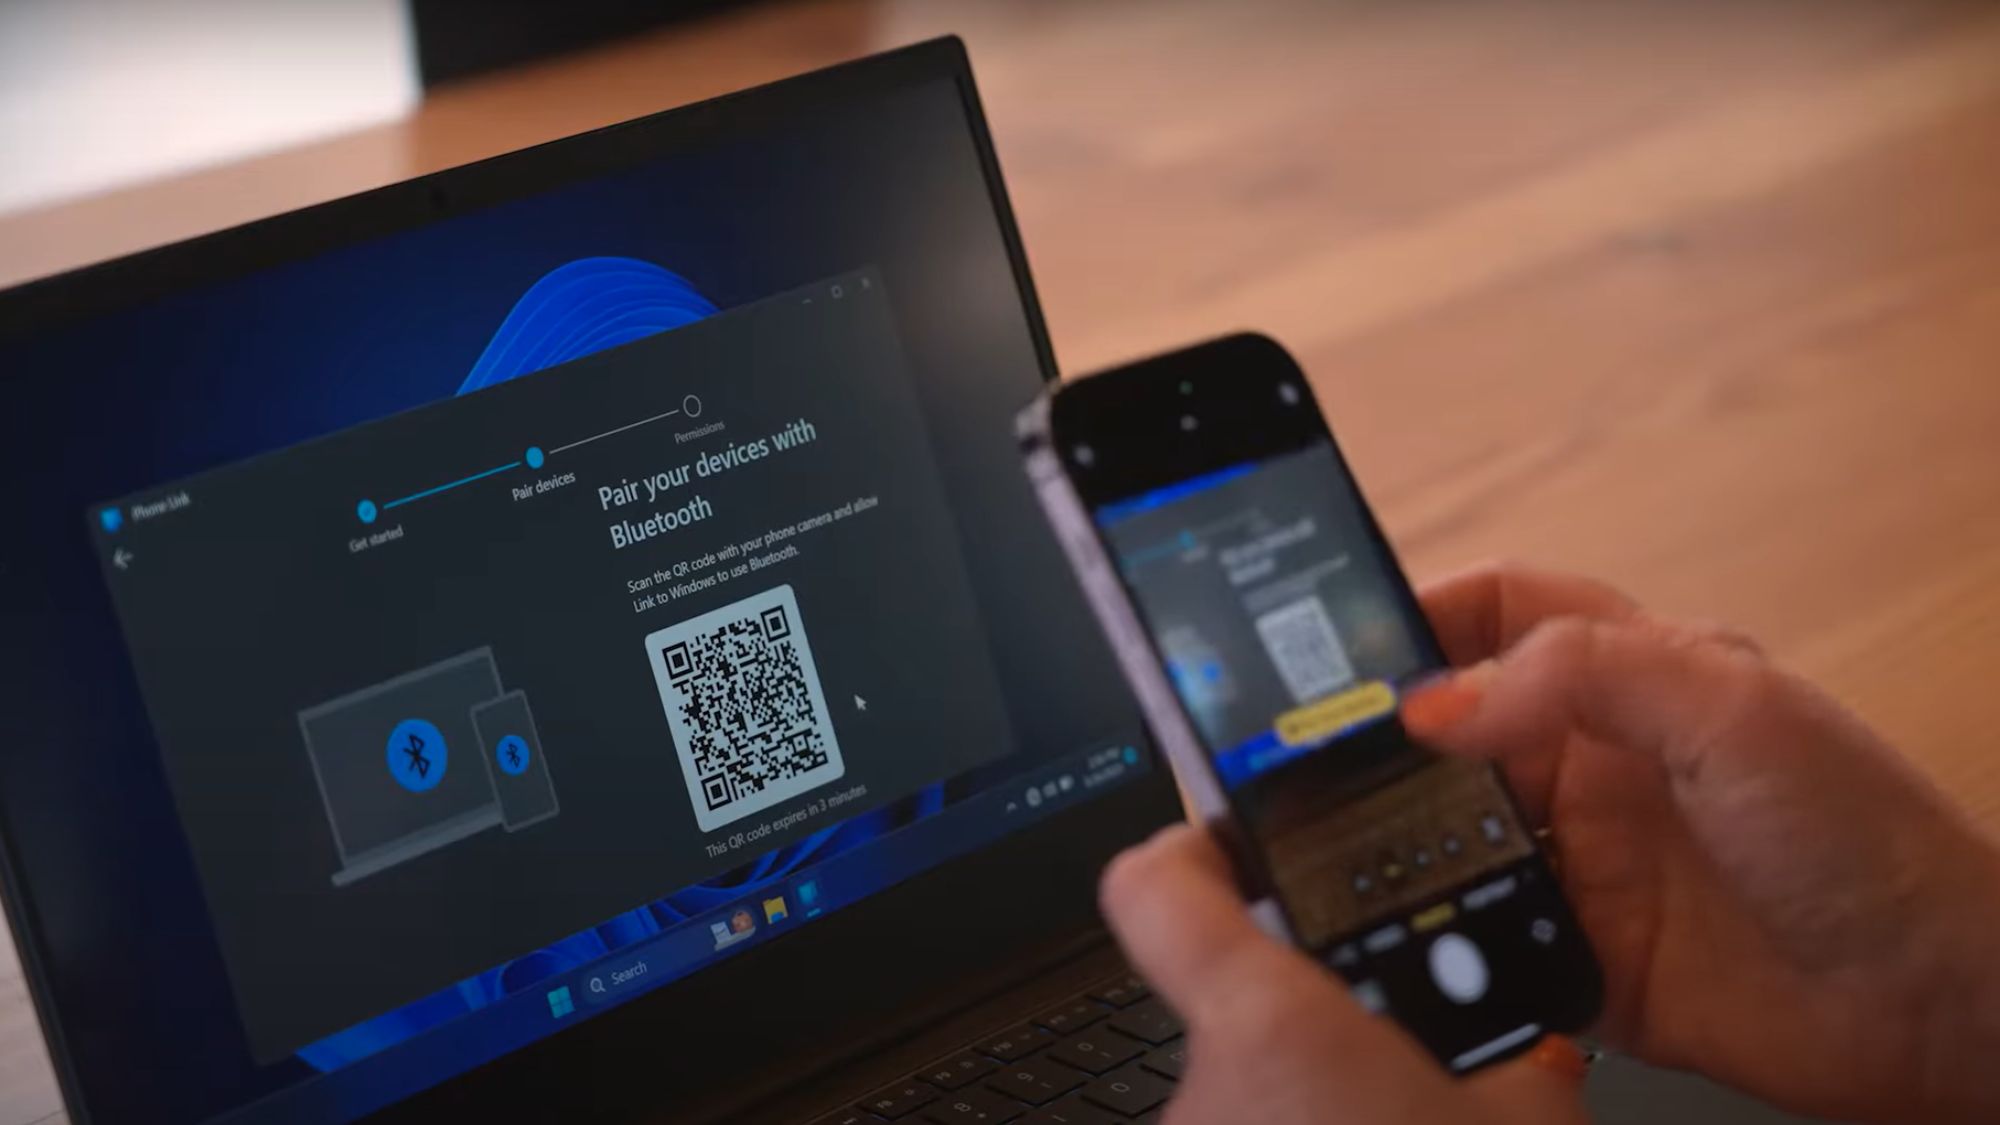 scanning phone link qr code on iphone